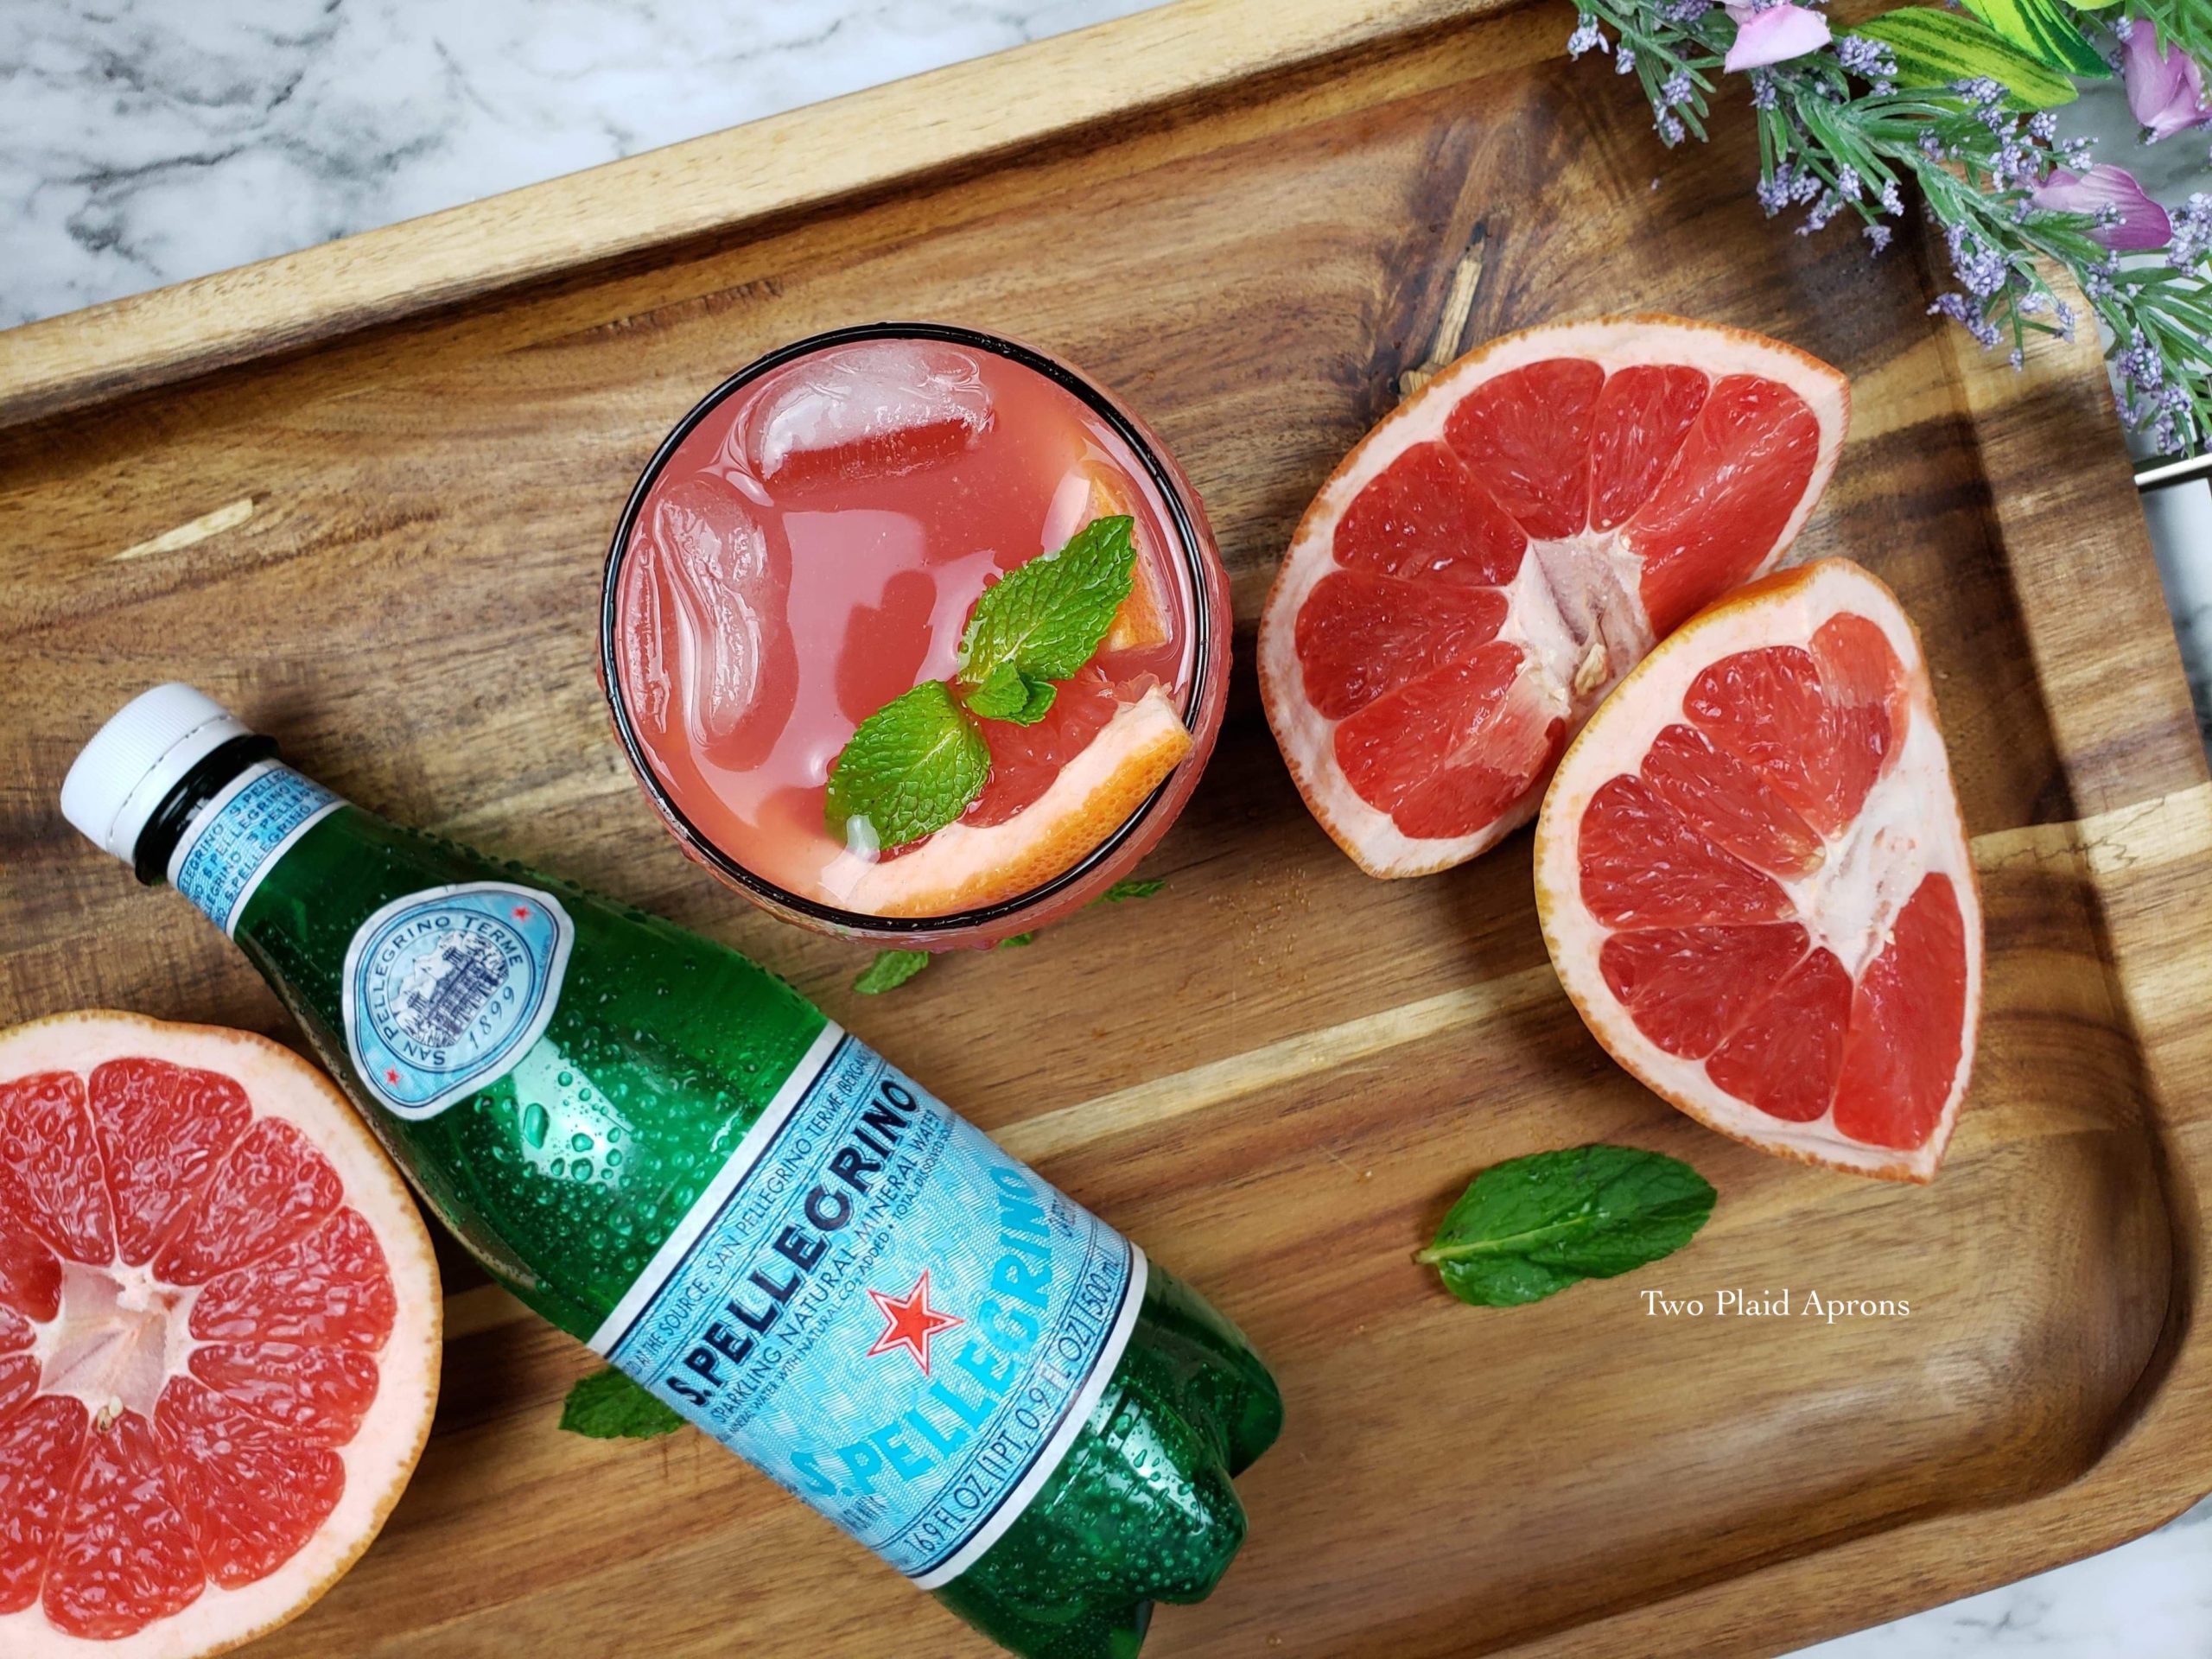 grapefruit spritzer made with San Pellegrino and mint